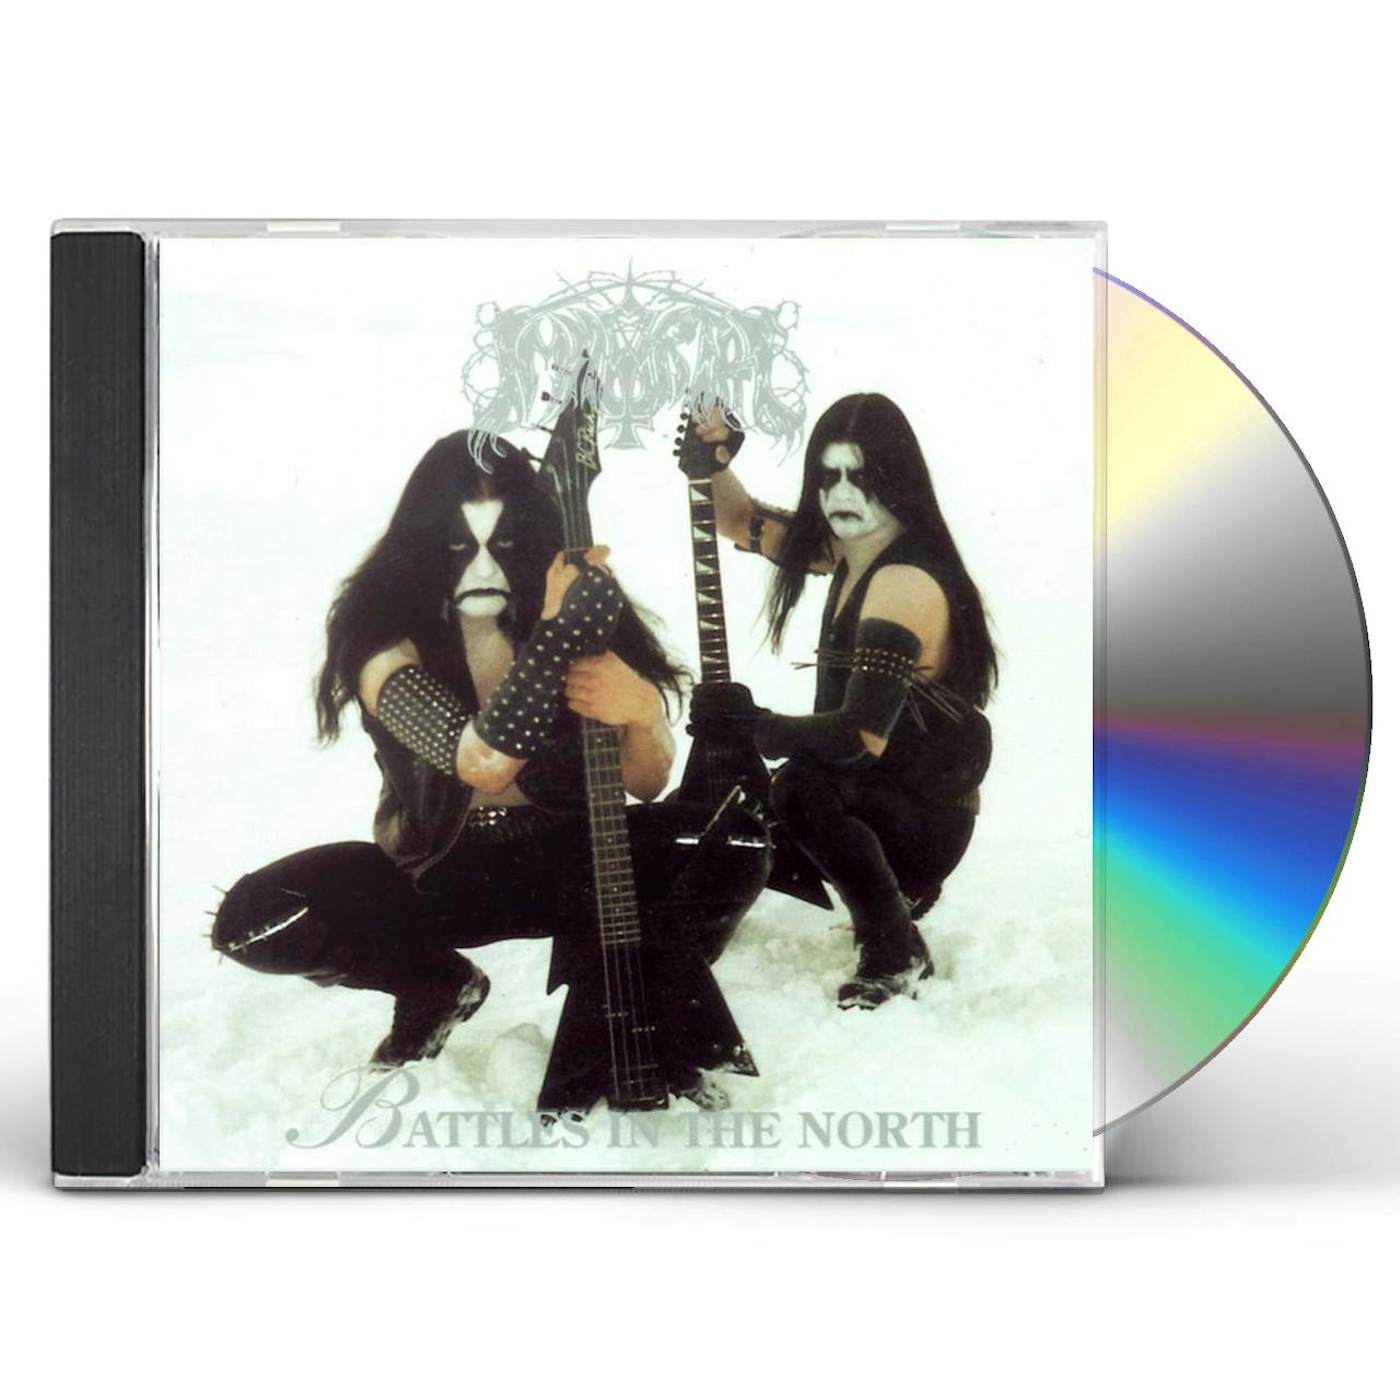 Immortal BATTLES IN THE NORTH CD